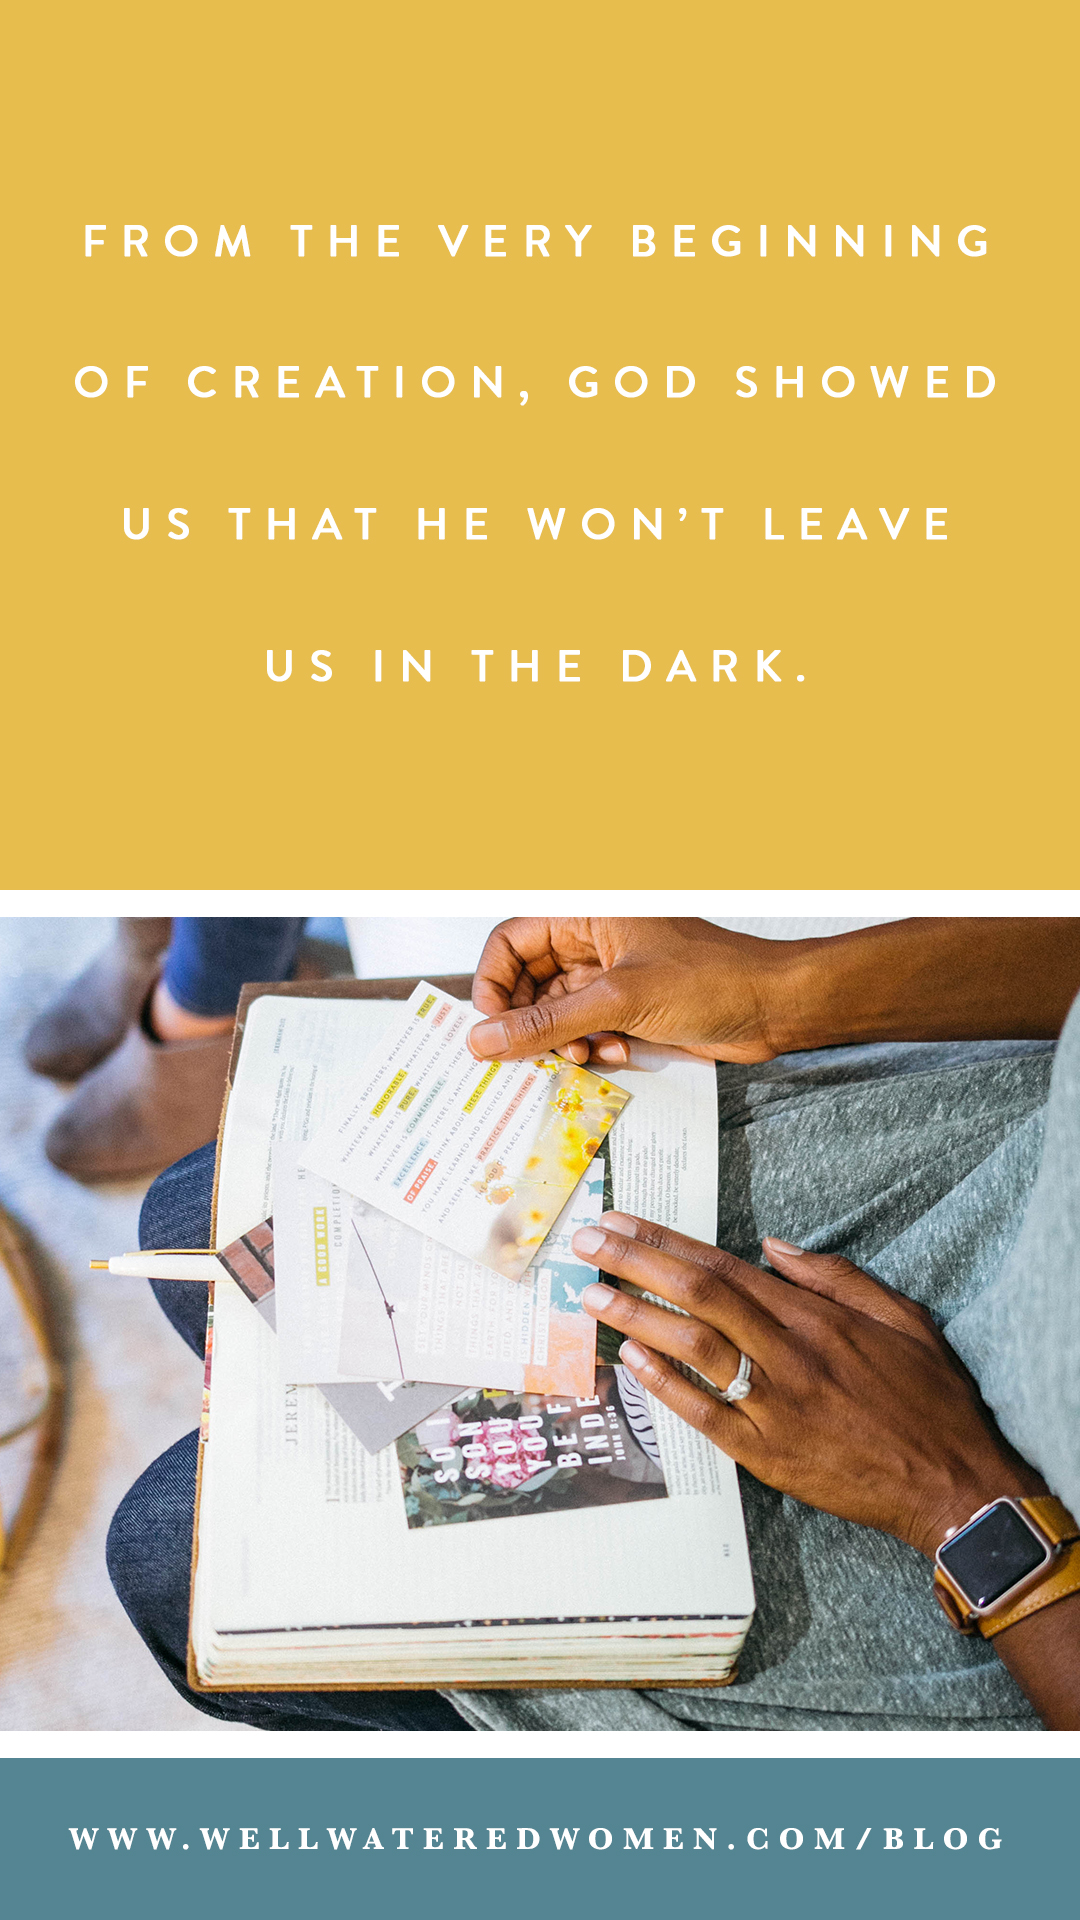 From the very beginning of creation, God showed us that He won’t leave us in the dark. We see confirmation of this in biblical leaders and prophets and key characters over and over again. Are you in a season of waiting? You’re in good company, my friend.